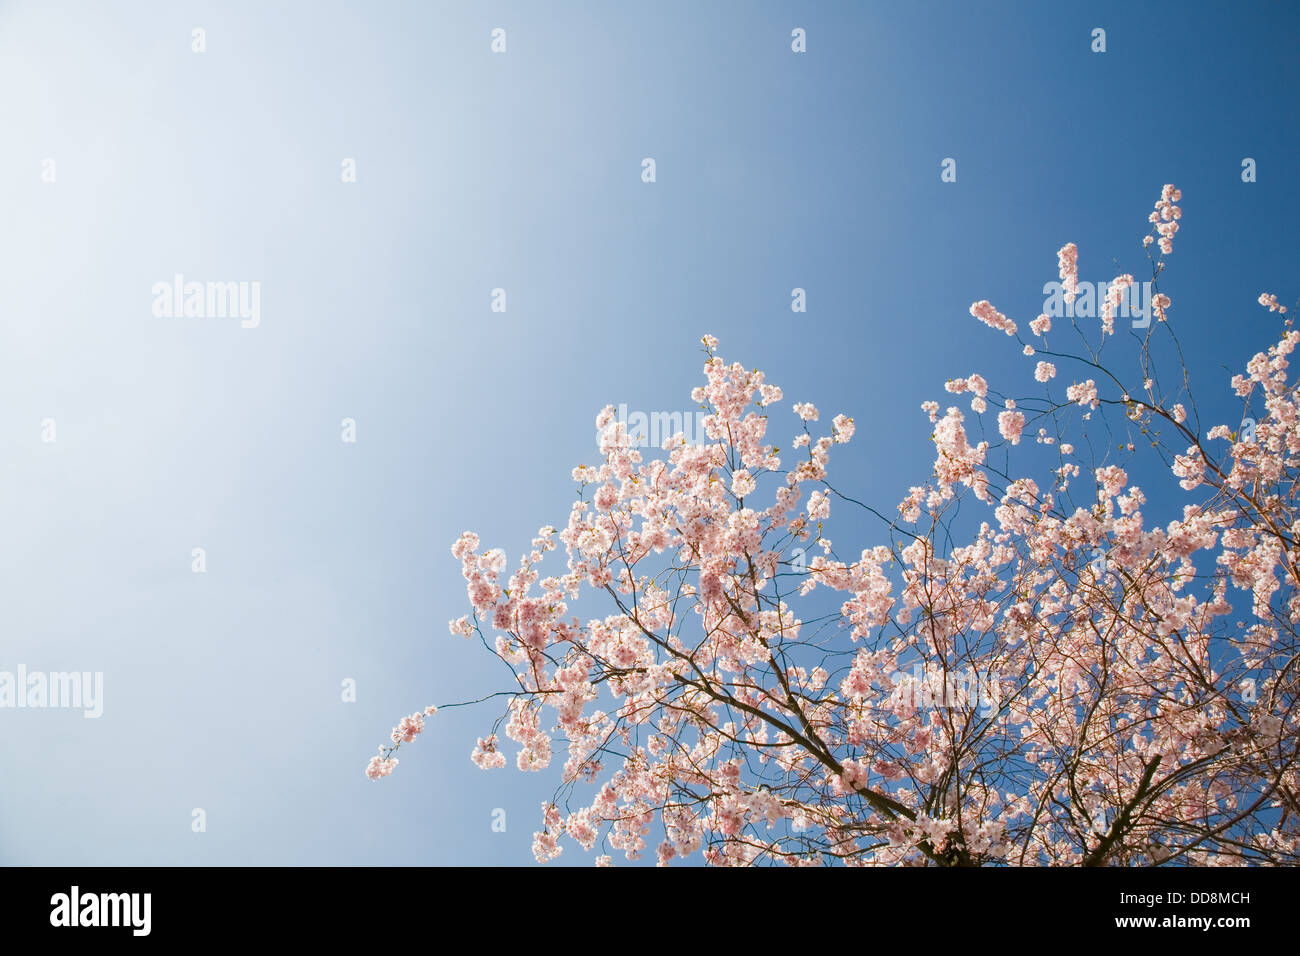 Pink blossom on cherry tree against bright clear sky, England, UK. Stock Photo